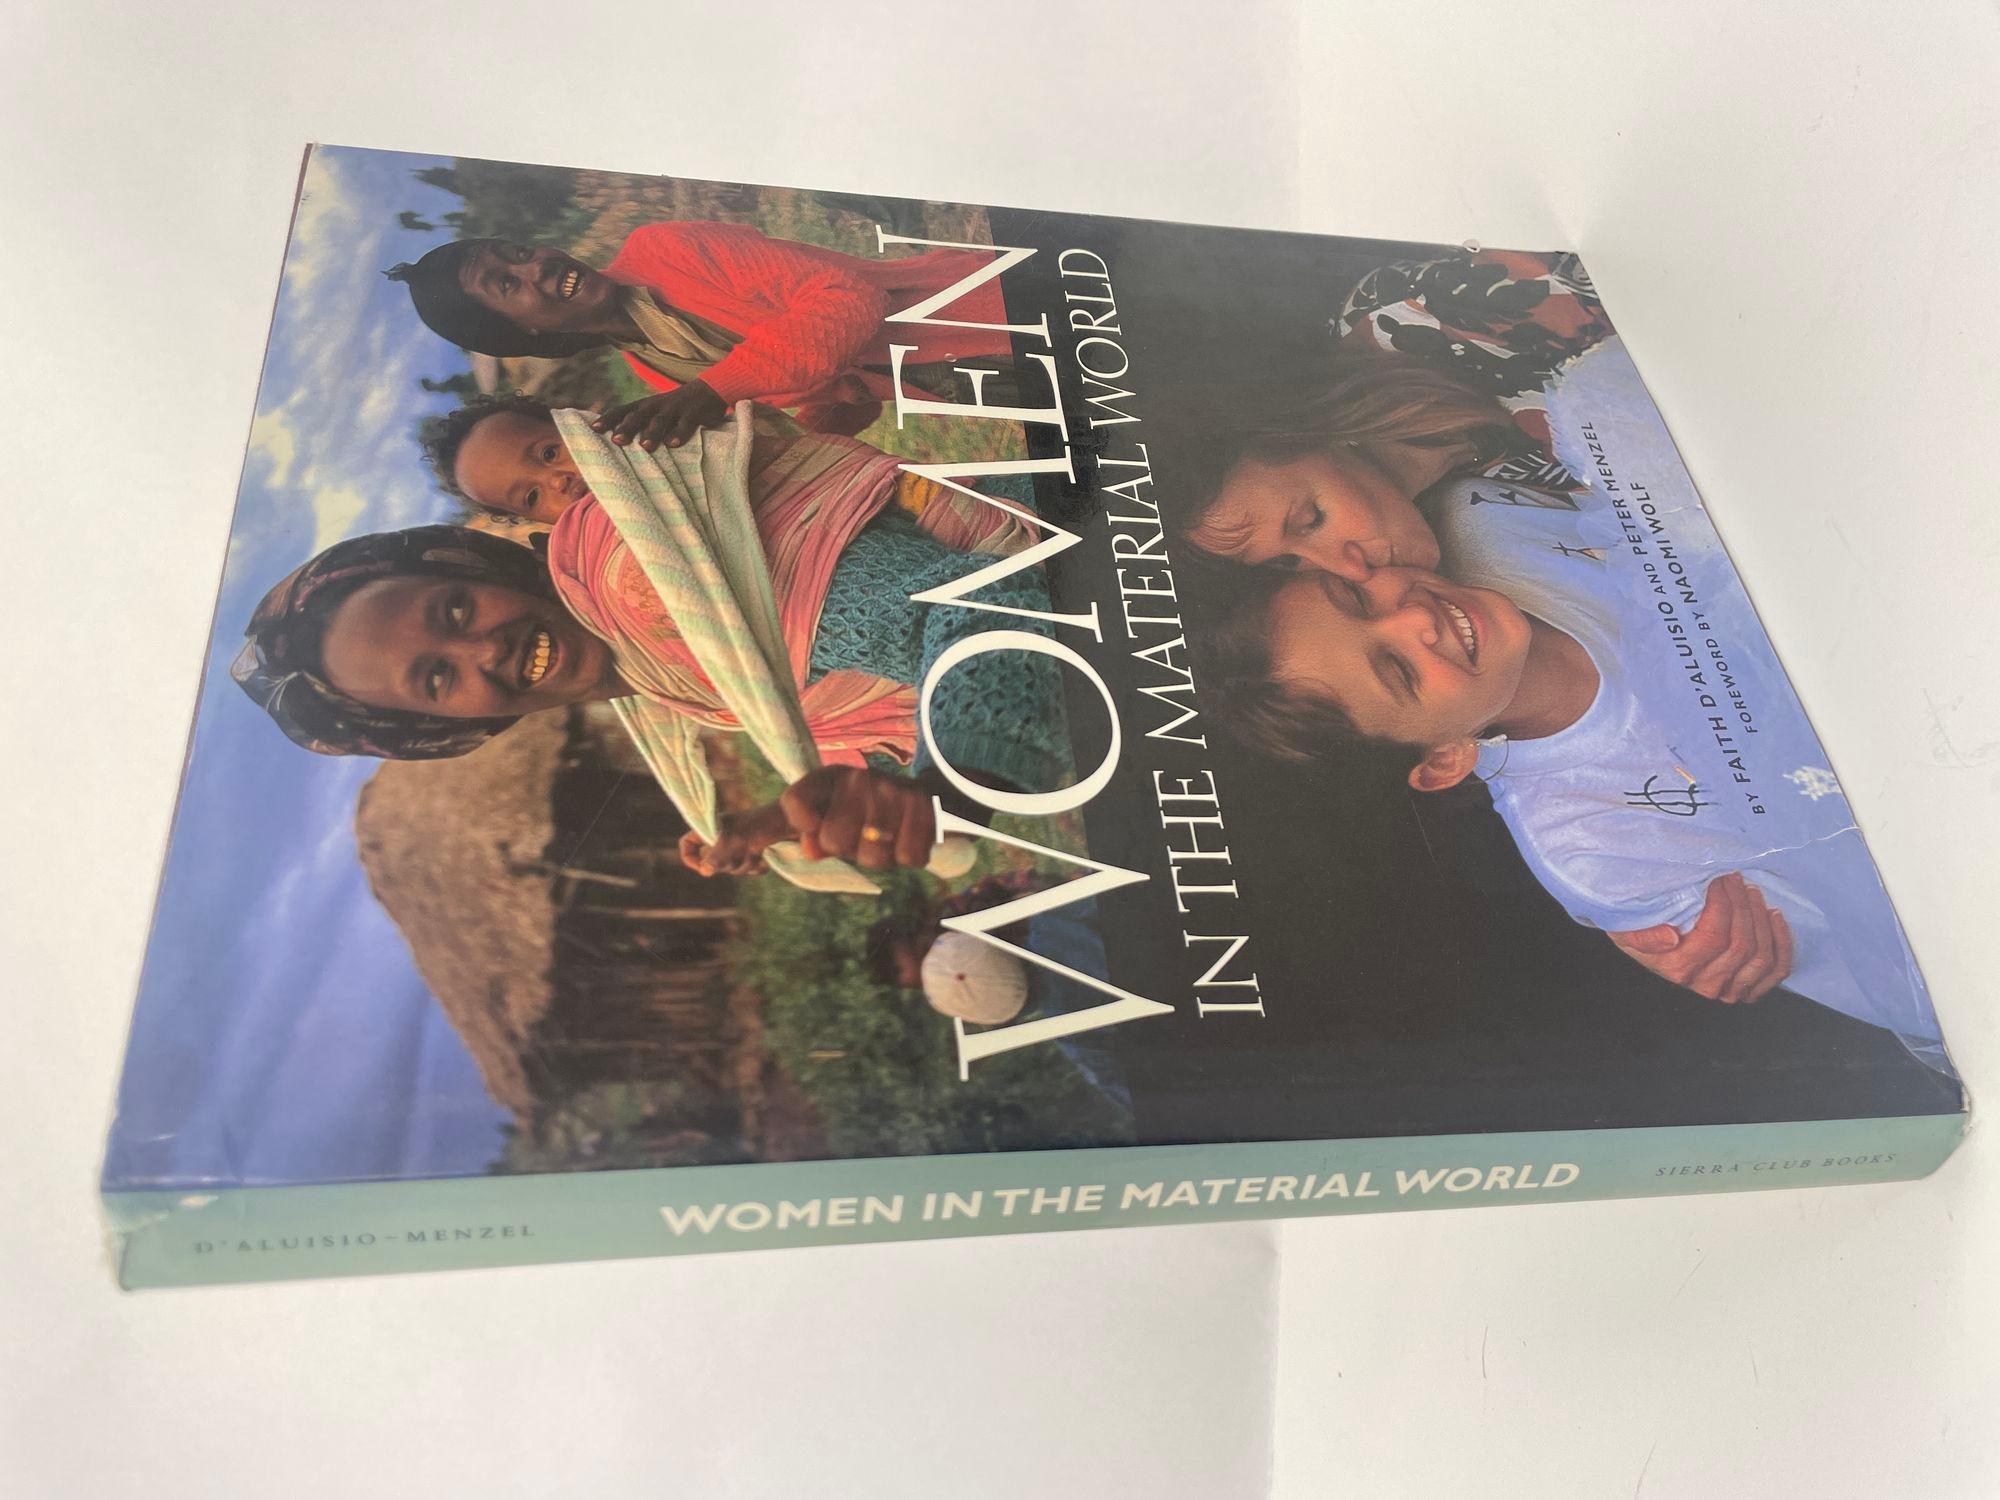 Women In the Material World by Faith D'Aluiso and Peter Menzel Hardcover Book.A companion to the groundbreaking bestseller Material World: A Global Family Portrait, this remarkable volume portrays the striking similarities and profound differences